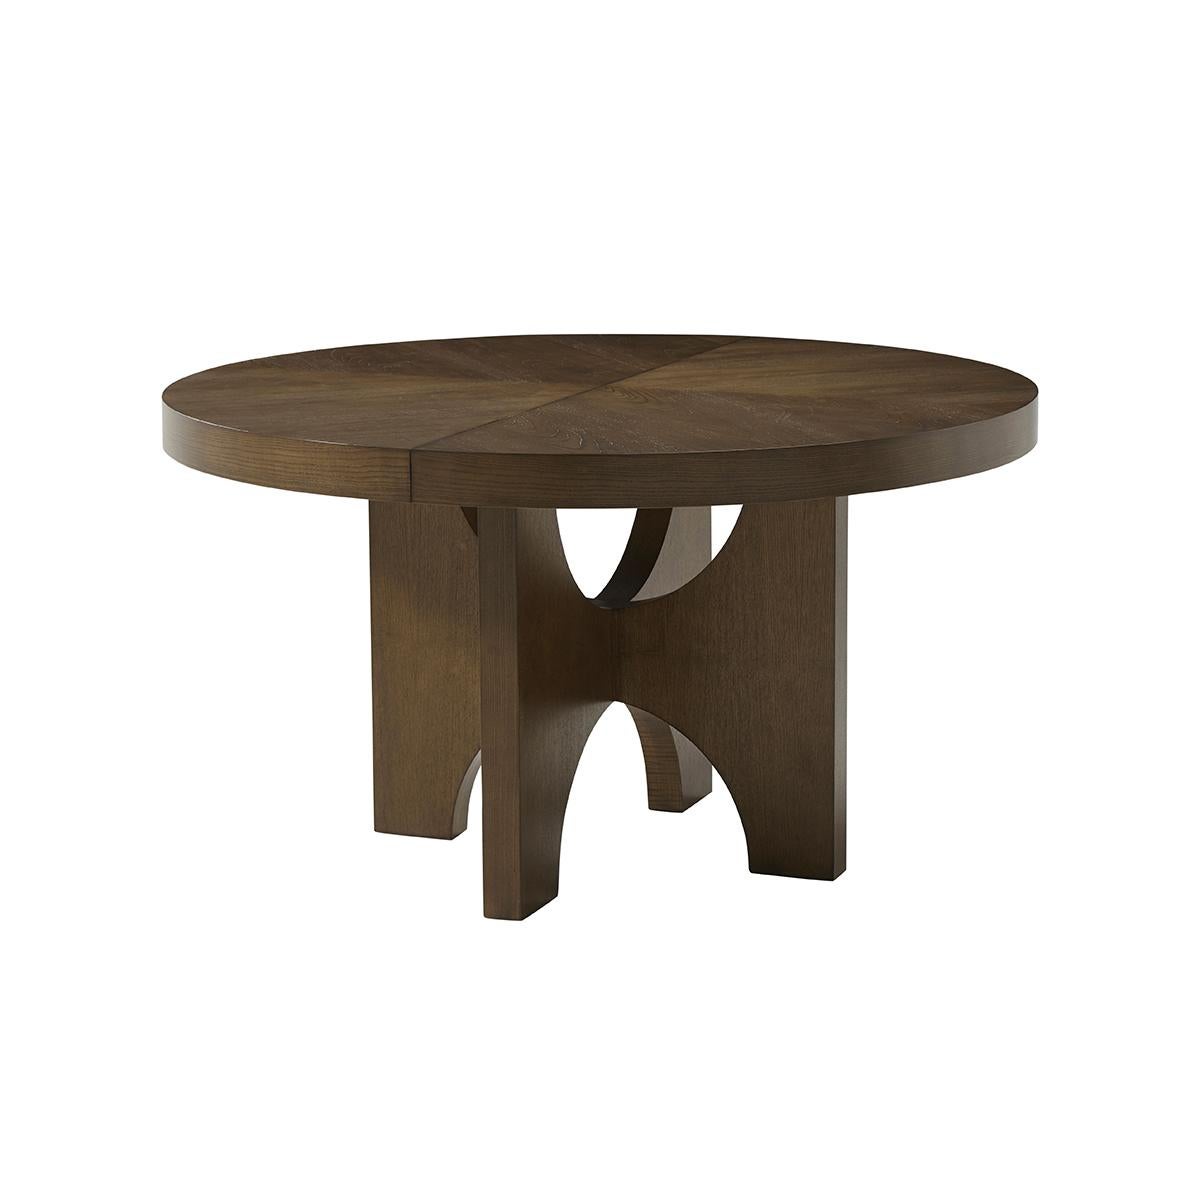 Modern Extending Ash Dining Table, crafted from premium-figured cathedral ash, this dining table boasts a rich texture and a sleek, dark finish that adds a touch of elegance to any dining room. The closed round shape of the table invites an intimate